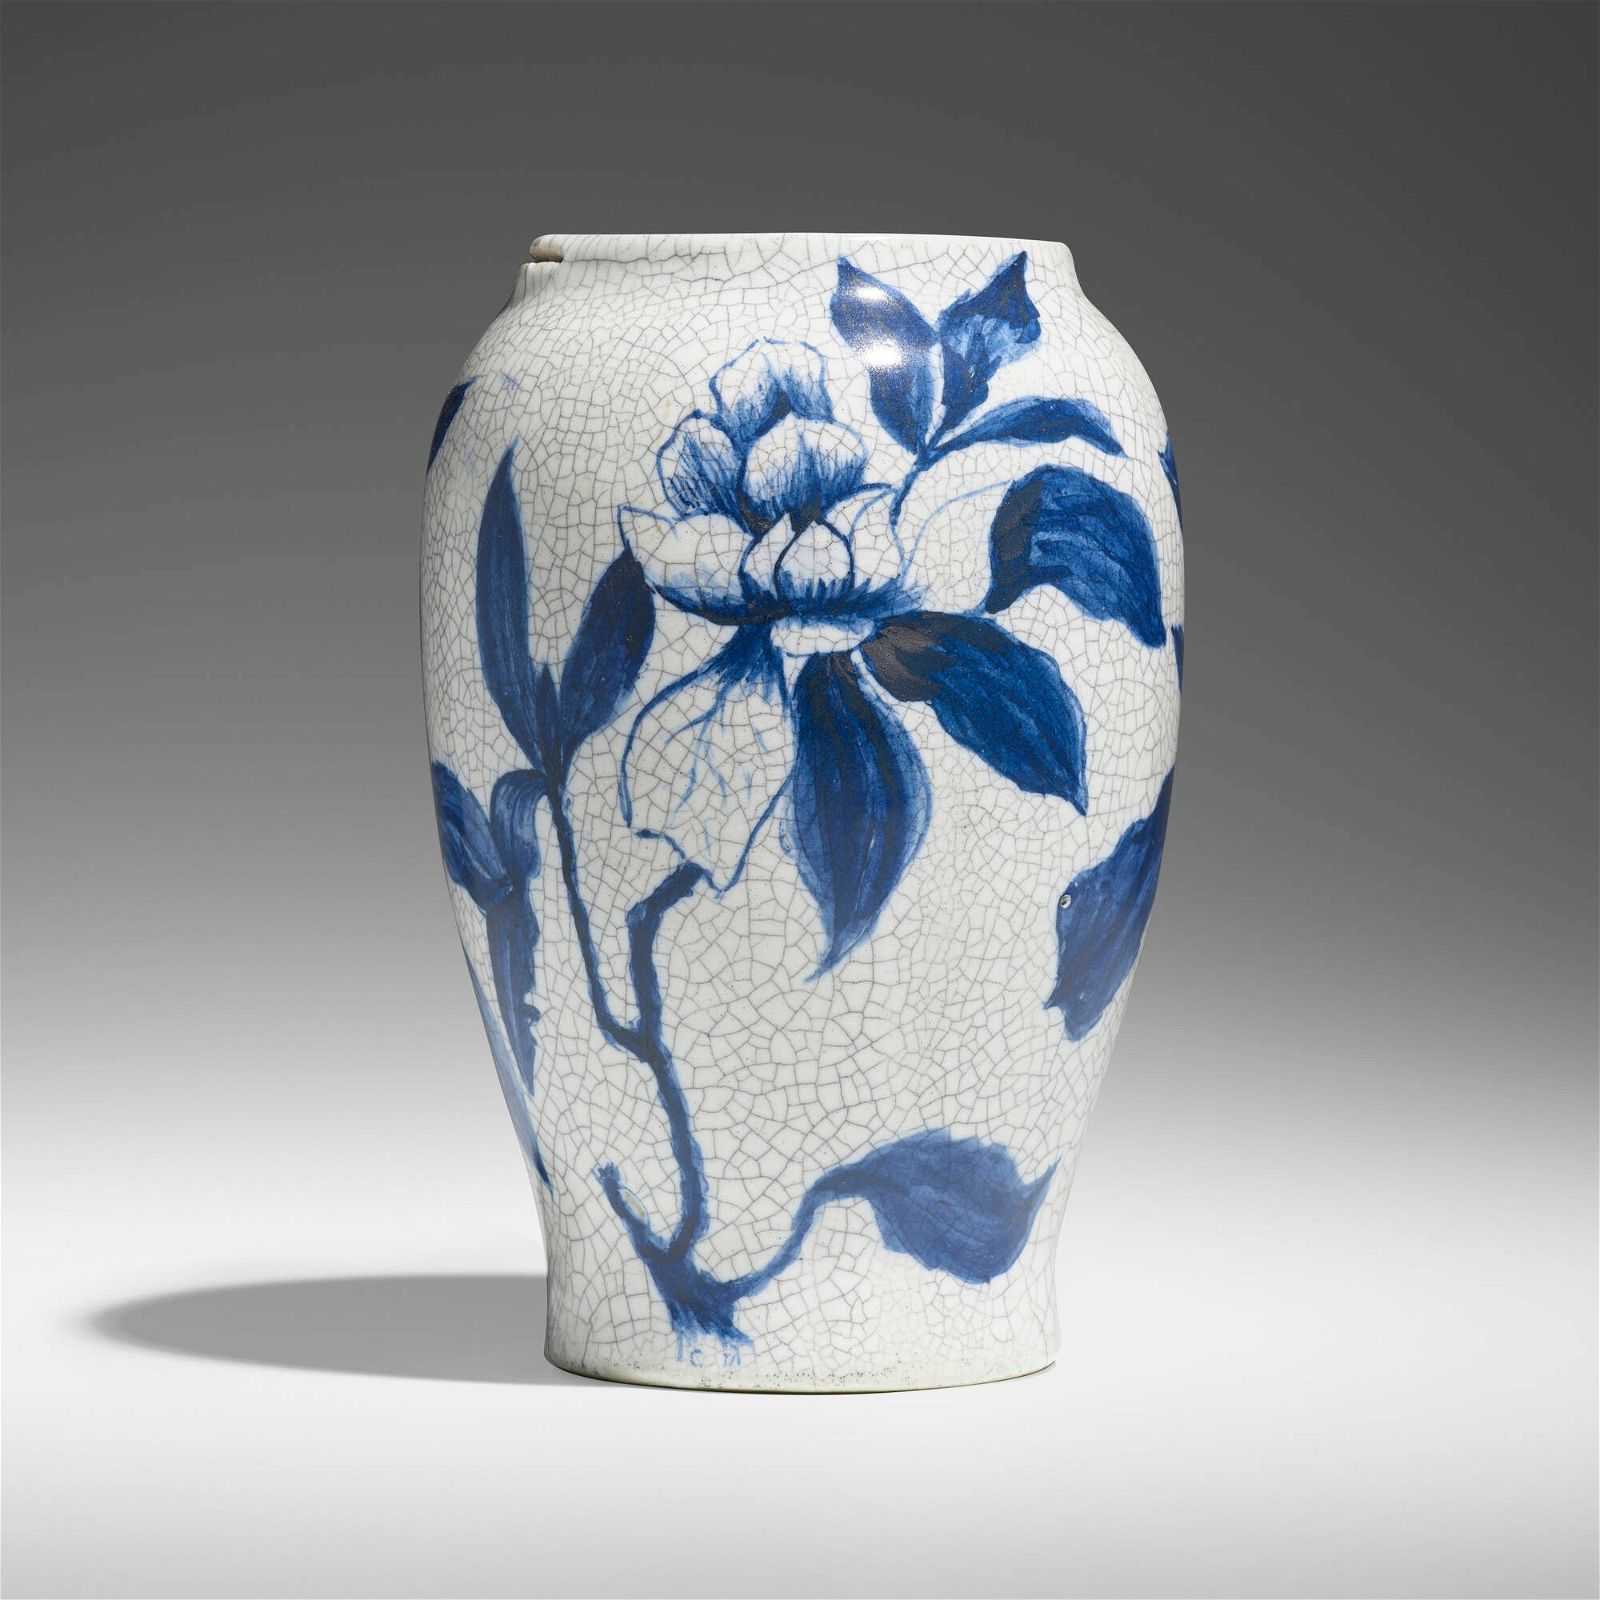 A vase decorated with images of magnolias by Hugh Robertson for Dedham Pottery achieved $14,000 plus the buyer’s premium in September 2023. Image courtesy of Rago Arts and Auction Center and LiveAuctioneers.